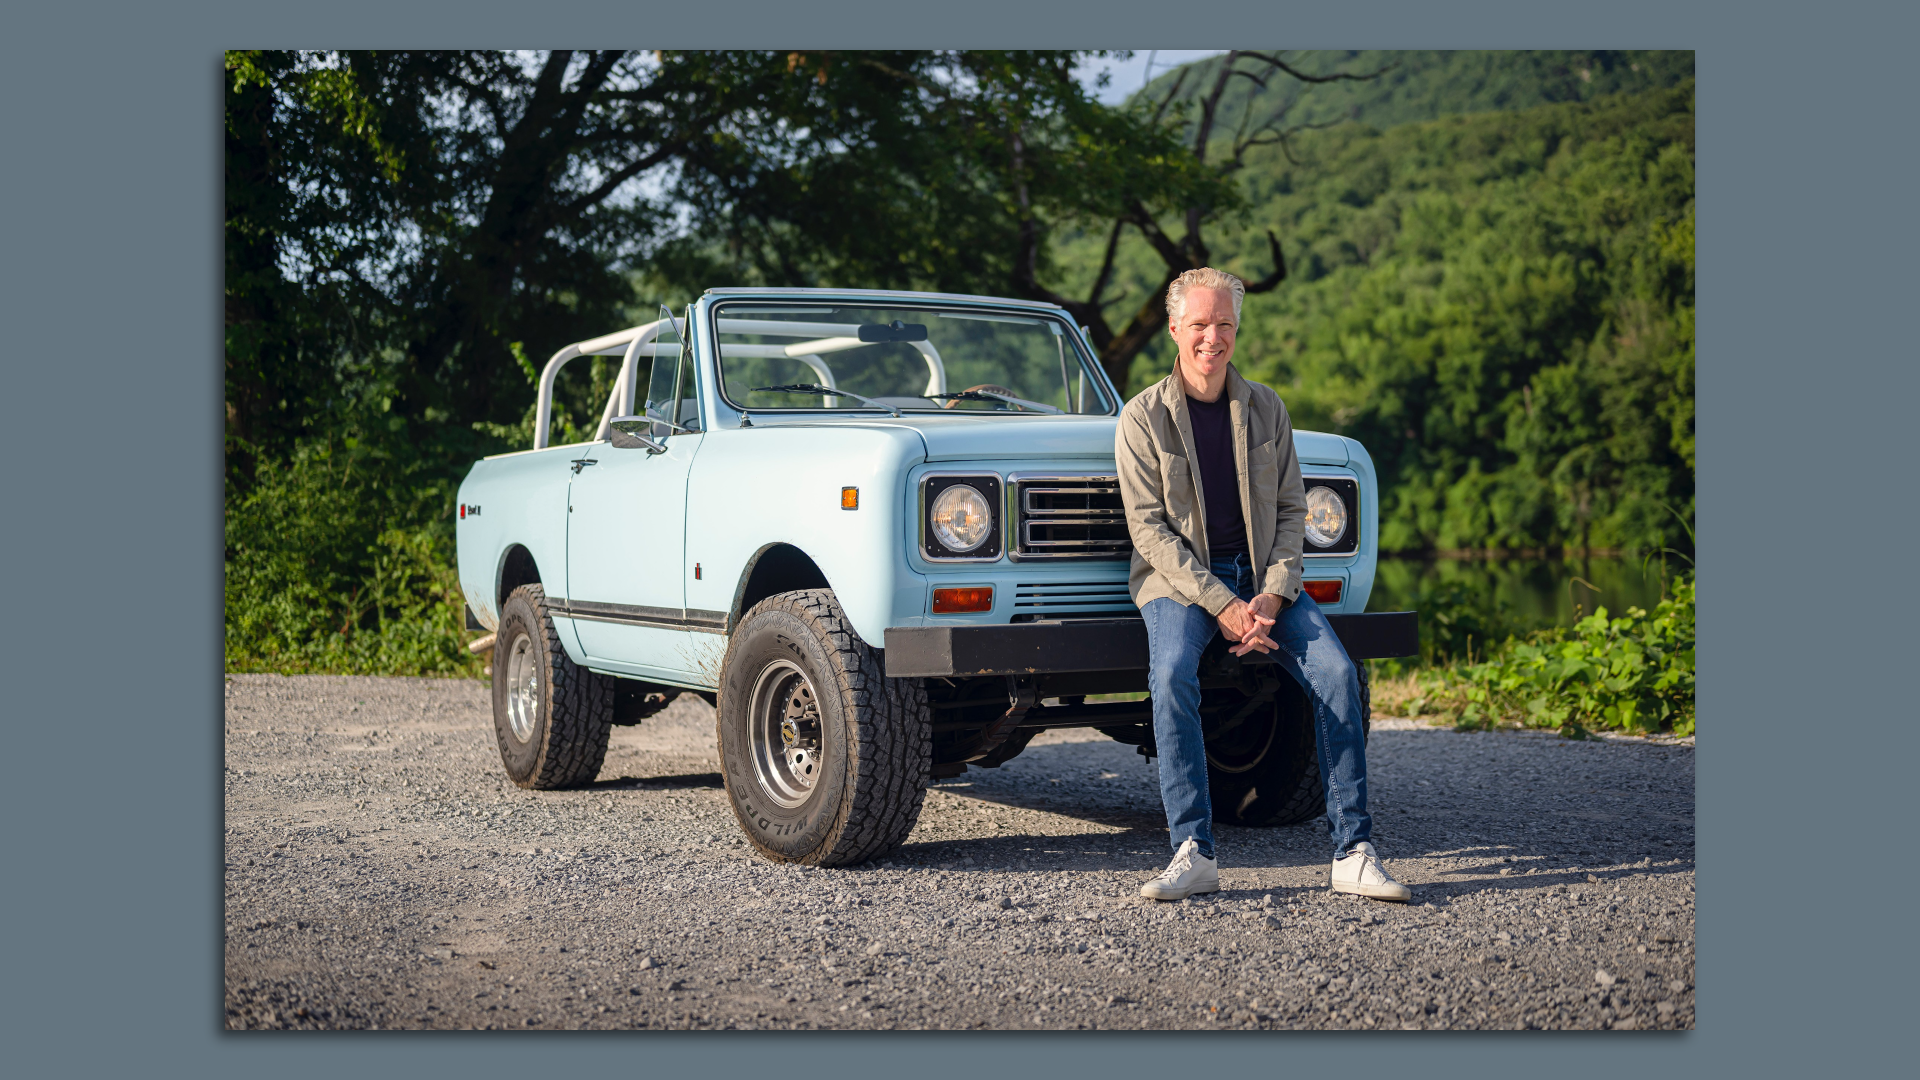 Image of Scout CEO Scott Keogh with a vintage Scout SUV